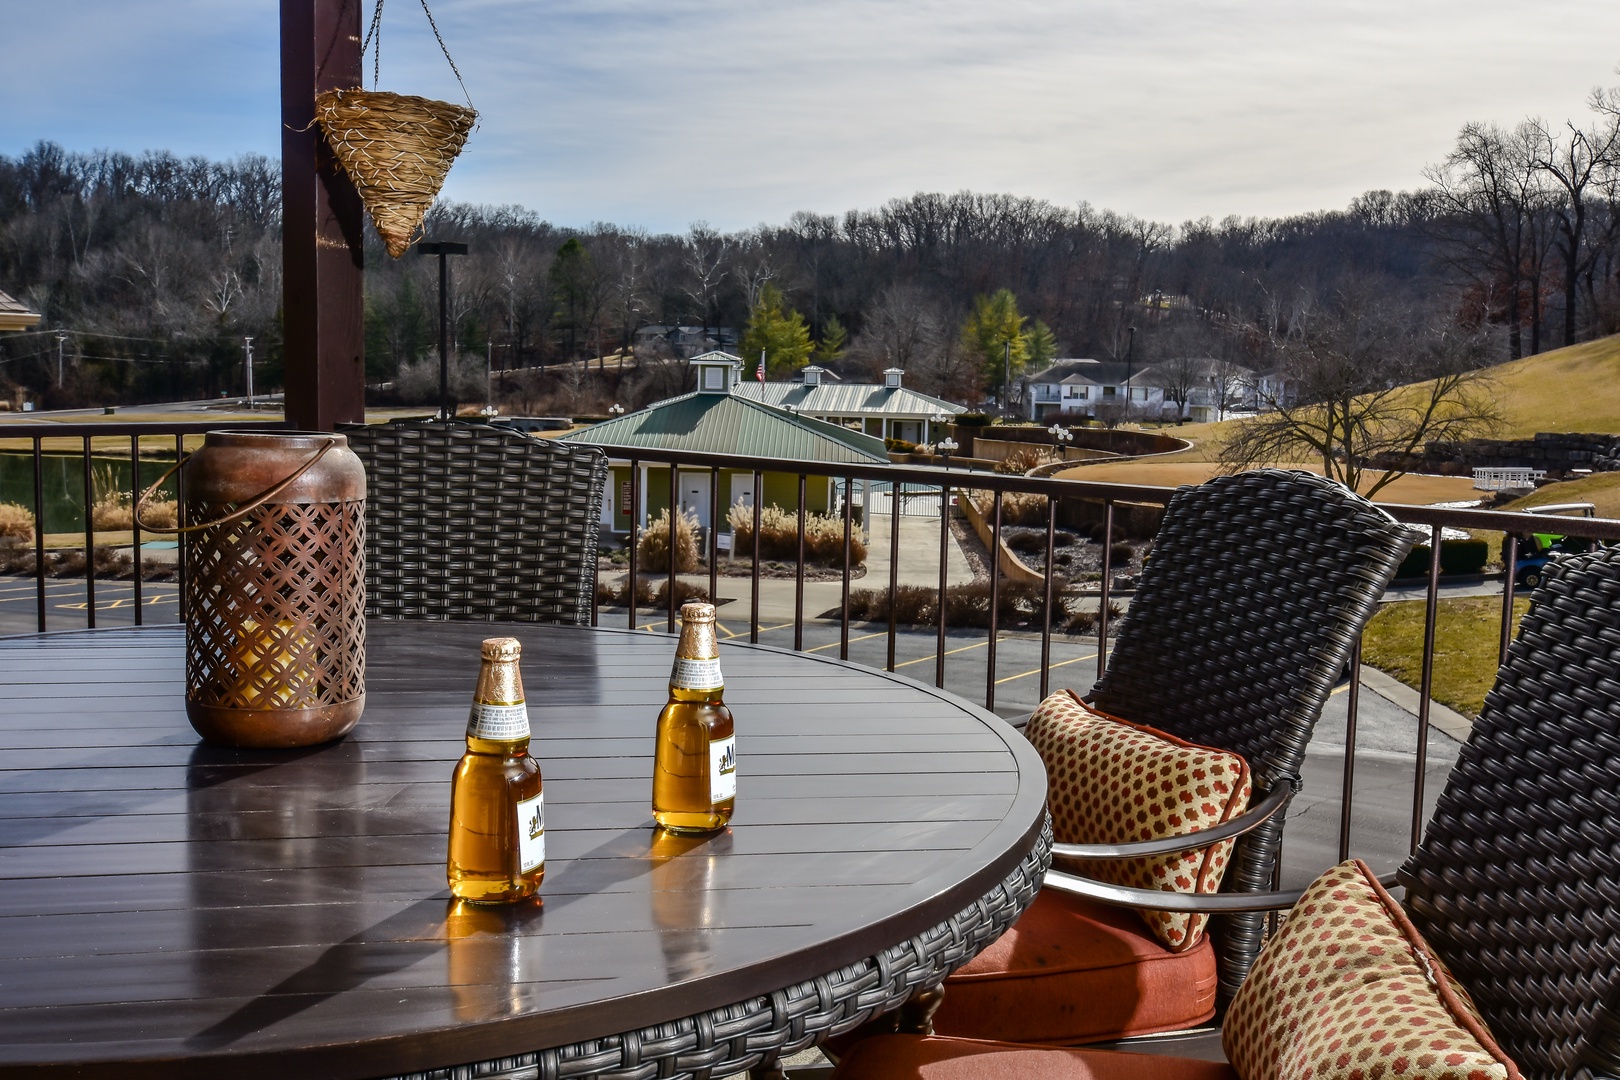 Unwind on the deck with gorgeous views of the golf course and pool